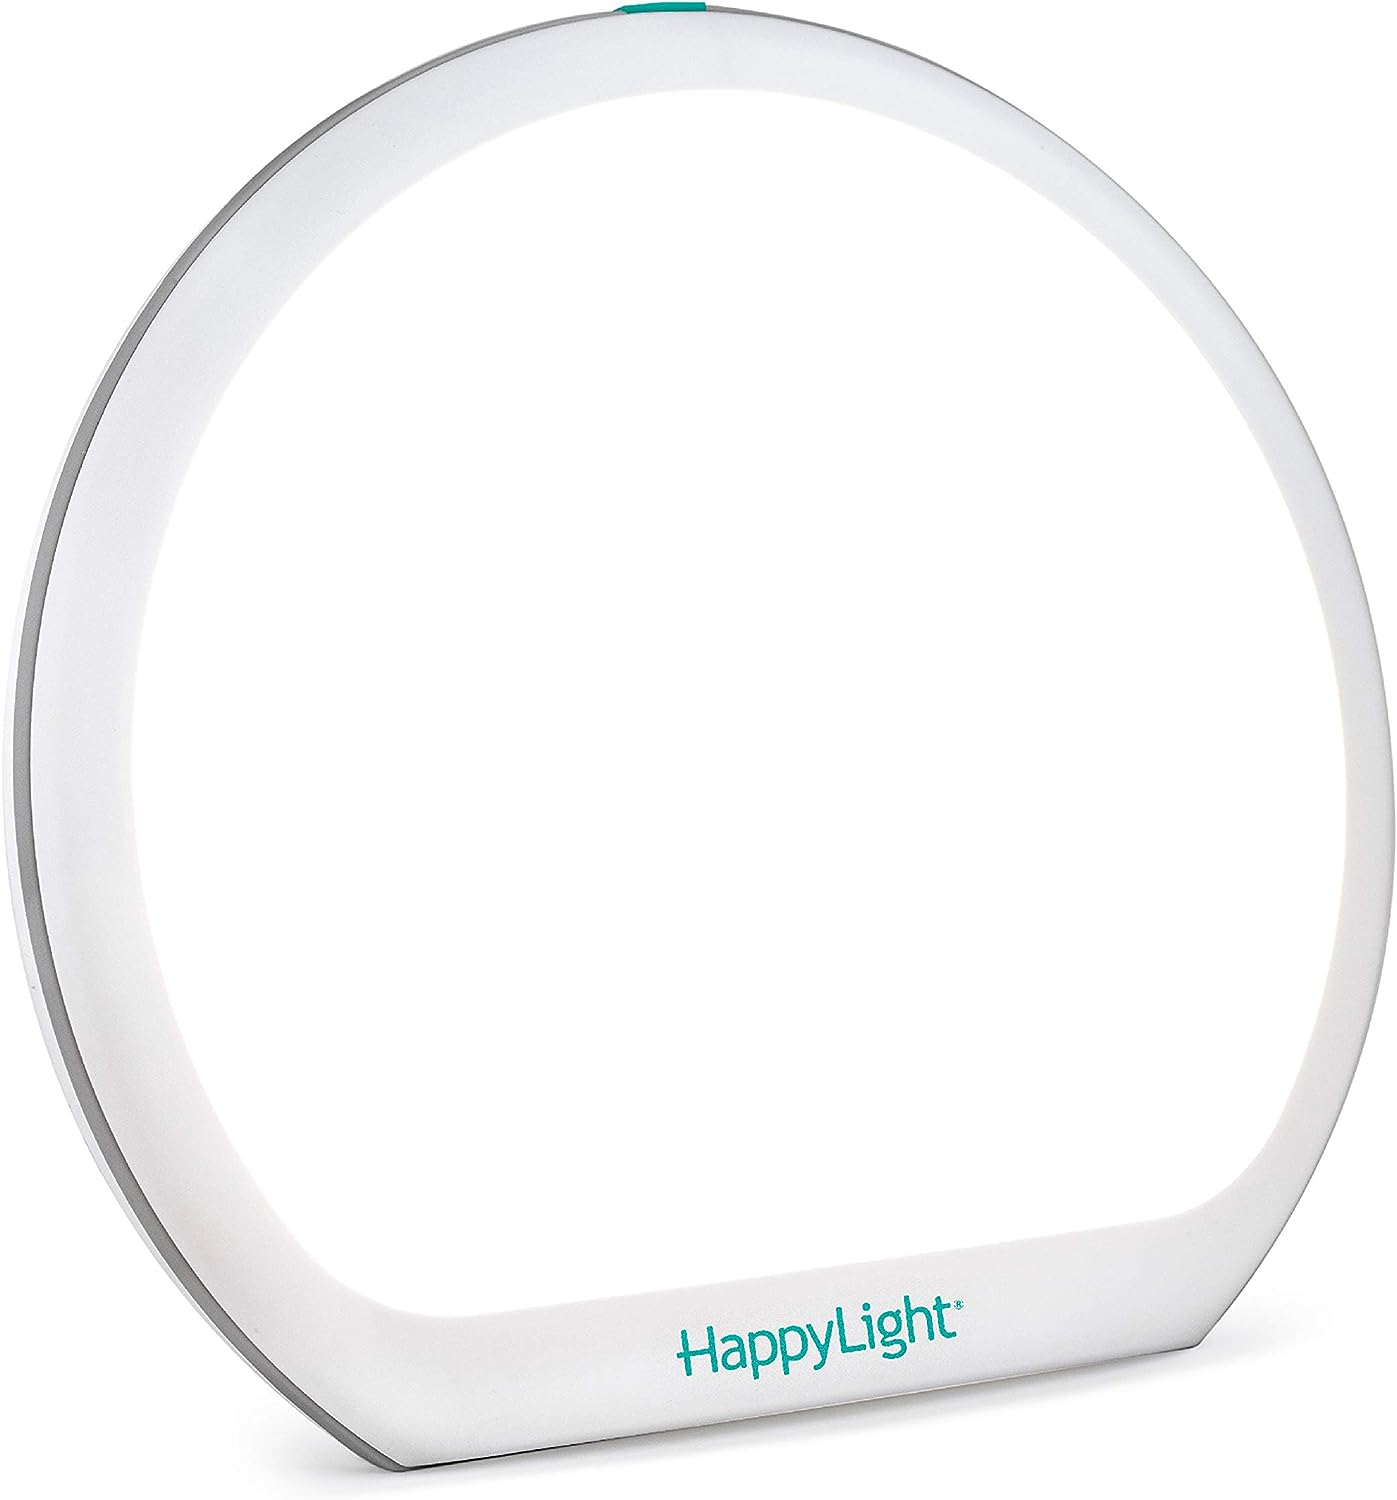 Verilux HappyLight Alba LED Therapy Lamp Review